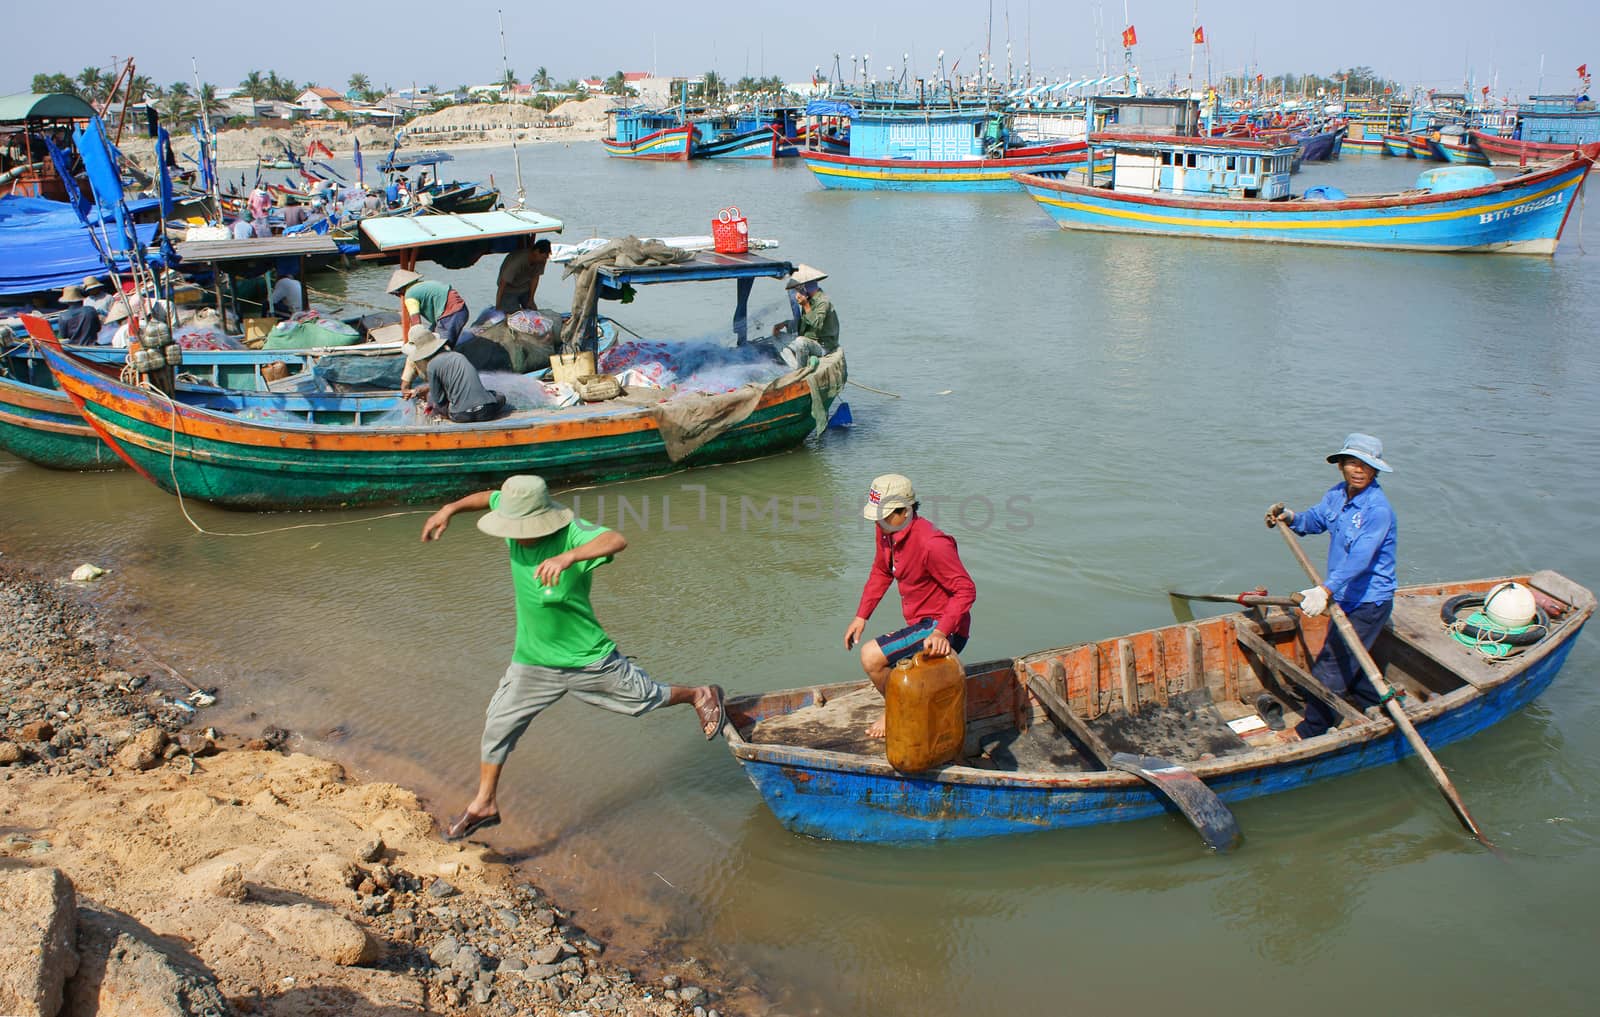 BINH THUAN, VIETNAM- JAN 20: Transportation people and goods by small wooden boat from fishing boat to shore, colorful fishing boat on habor on day at fishing village, Viet Nam, Jan 20, 2014